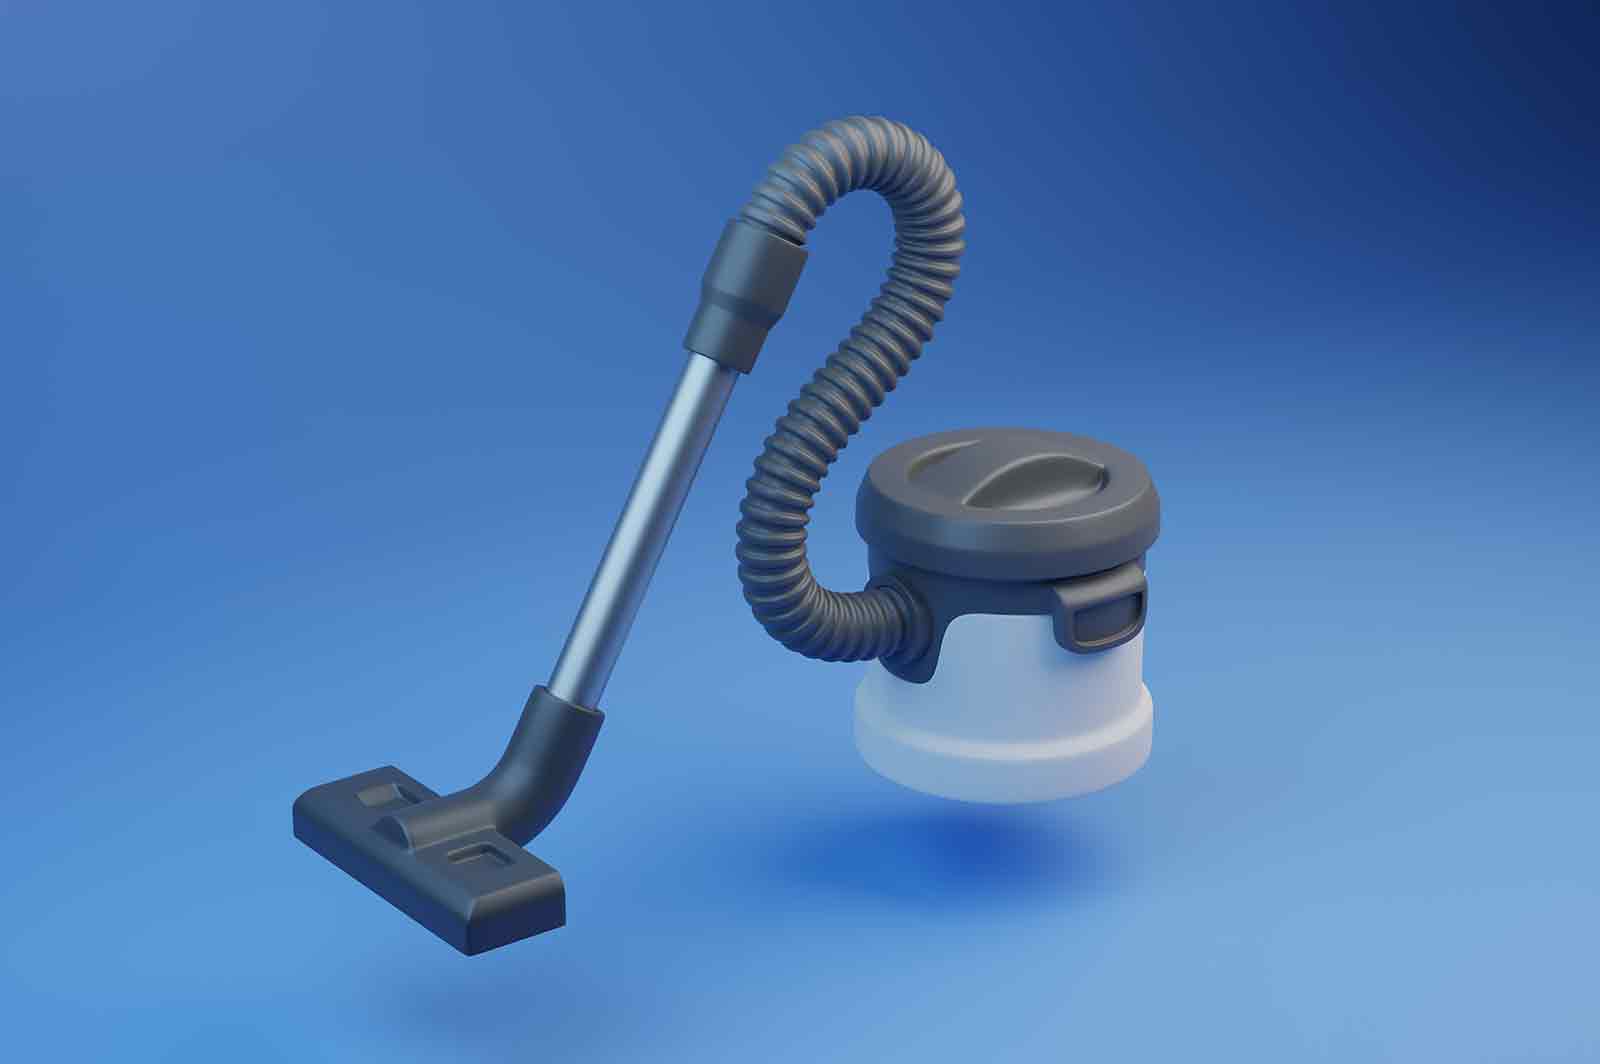 Modern vacuum cleaner 3d rendered illustration. Electrical home device for cleanup. Cleaning service and disinfection concept